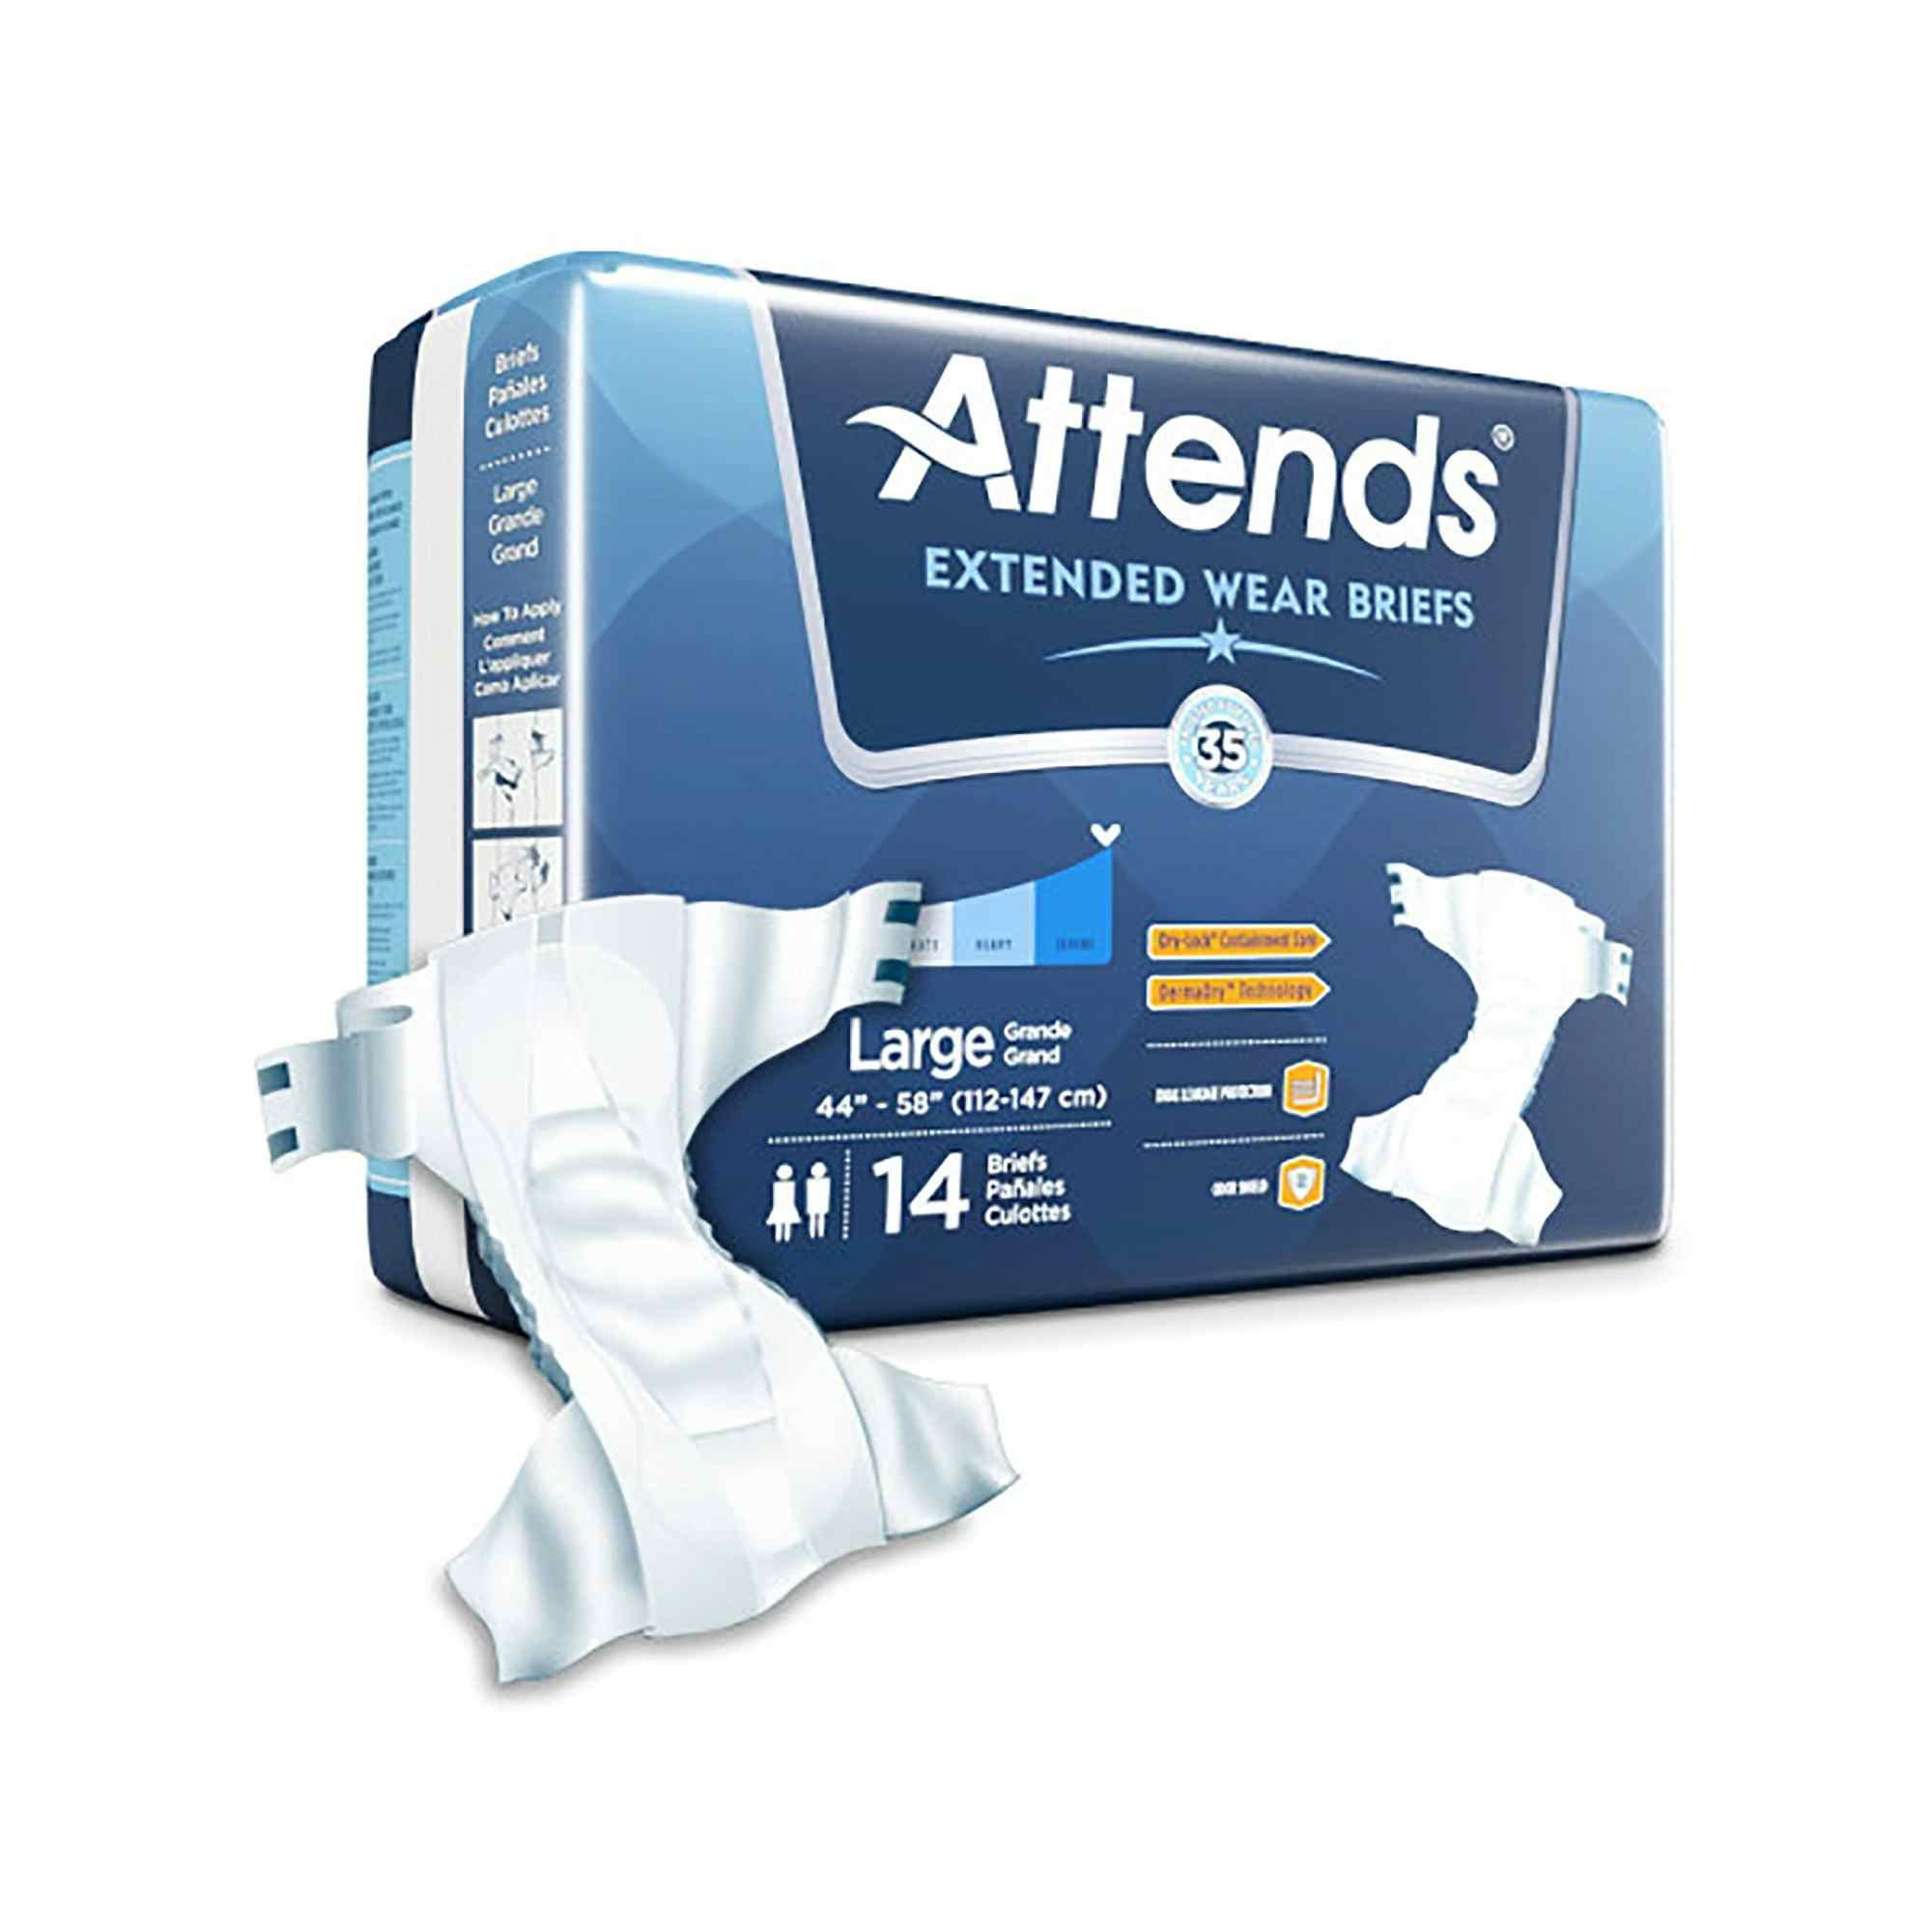 Attends Extended Wear Brief Adult Diapers with Tabs, Severe Absorbency, DDEW30, Large (44-58") - Case of 56 (4 Bags)